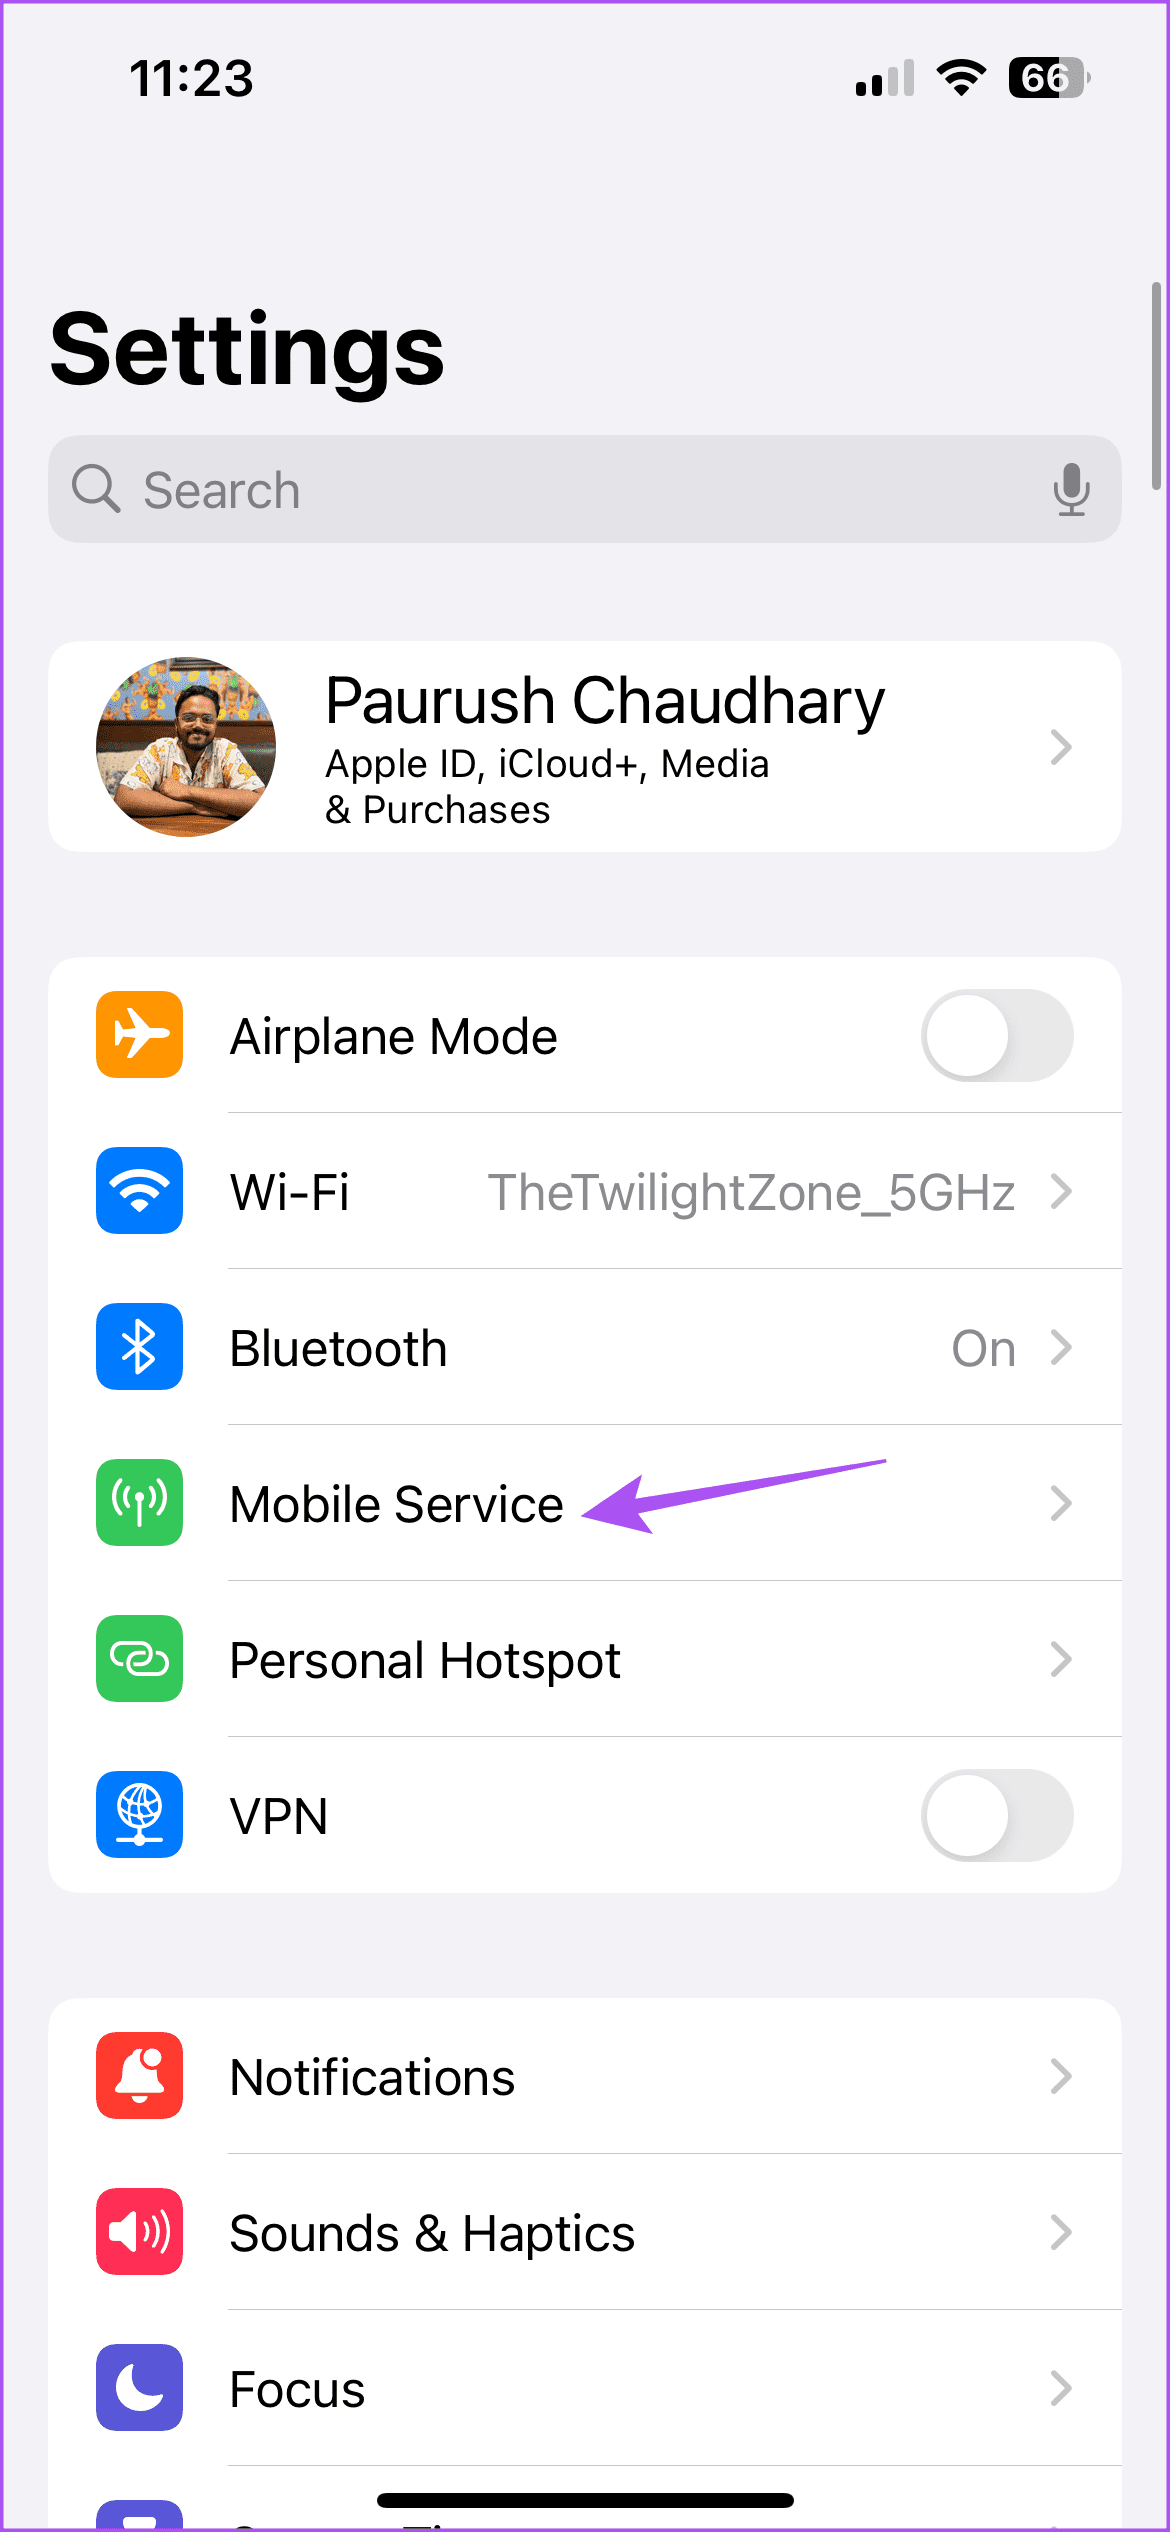 mobile service settings iphone 1